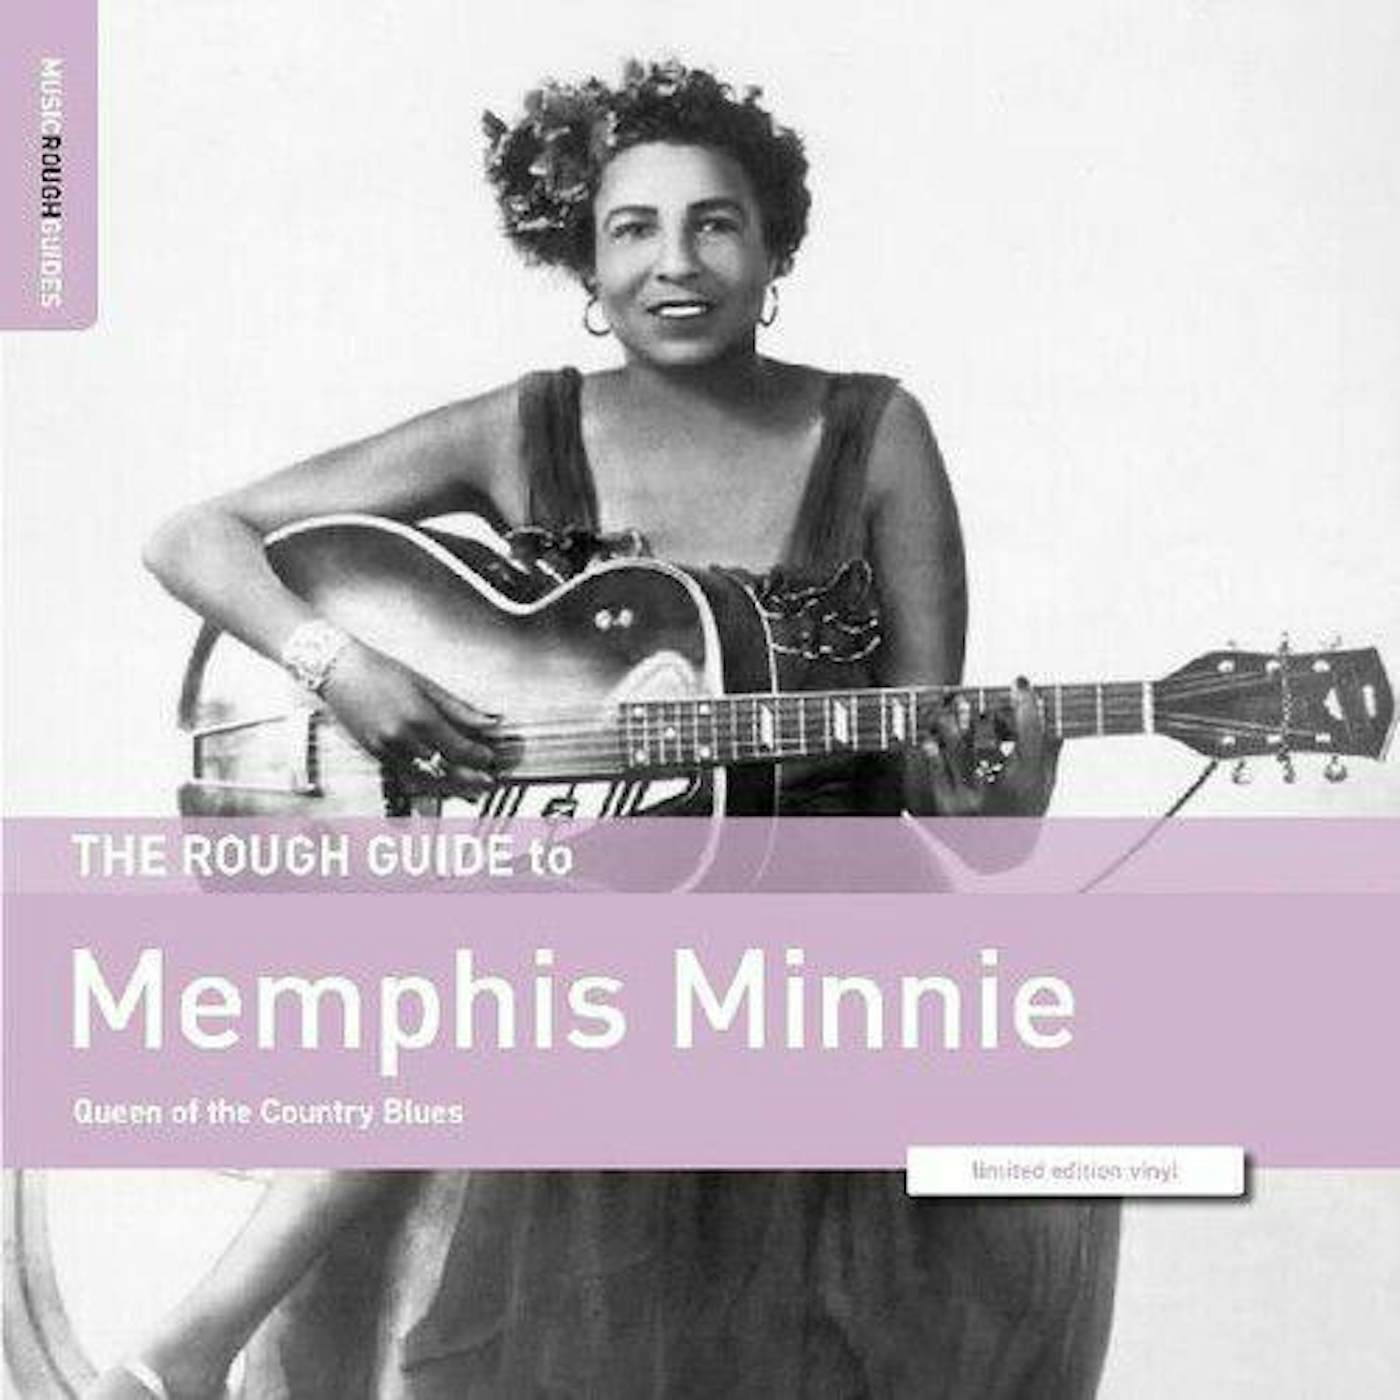 The Rough Guide To Memphis Minnie - Queen of the Country Blues Vinyl Record